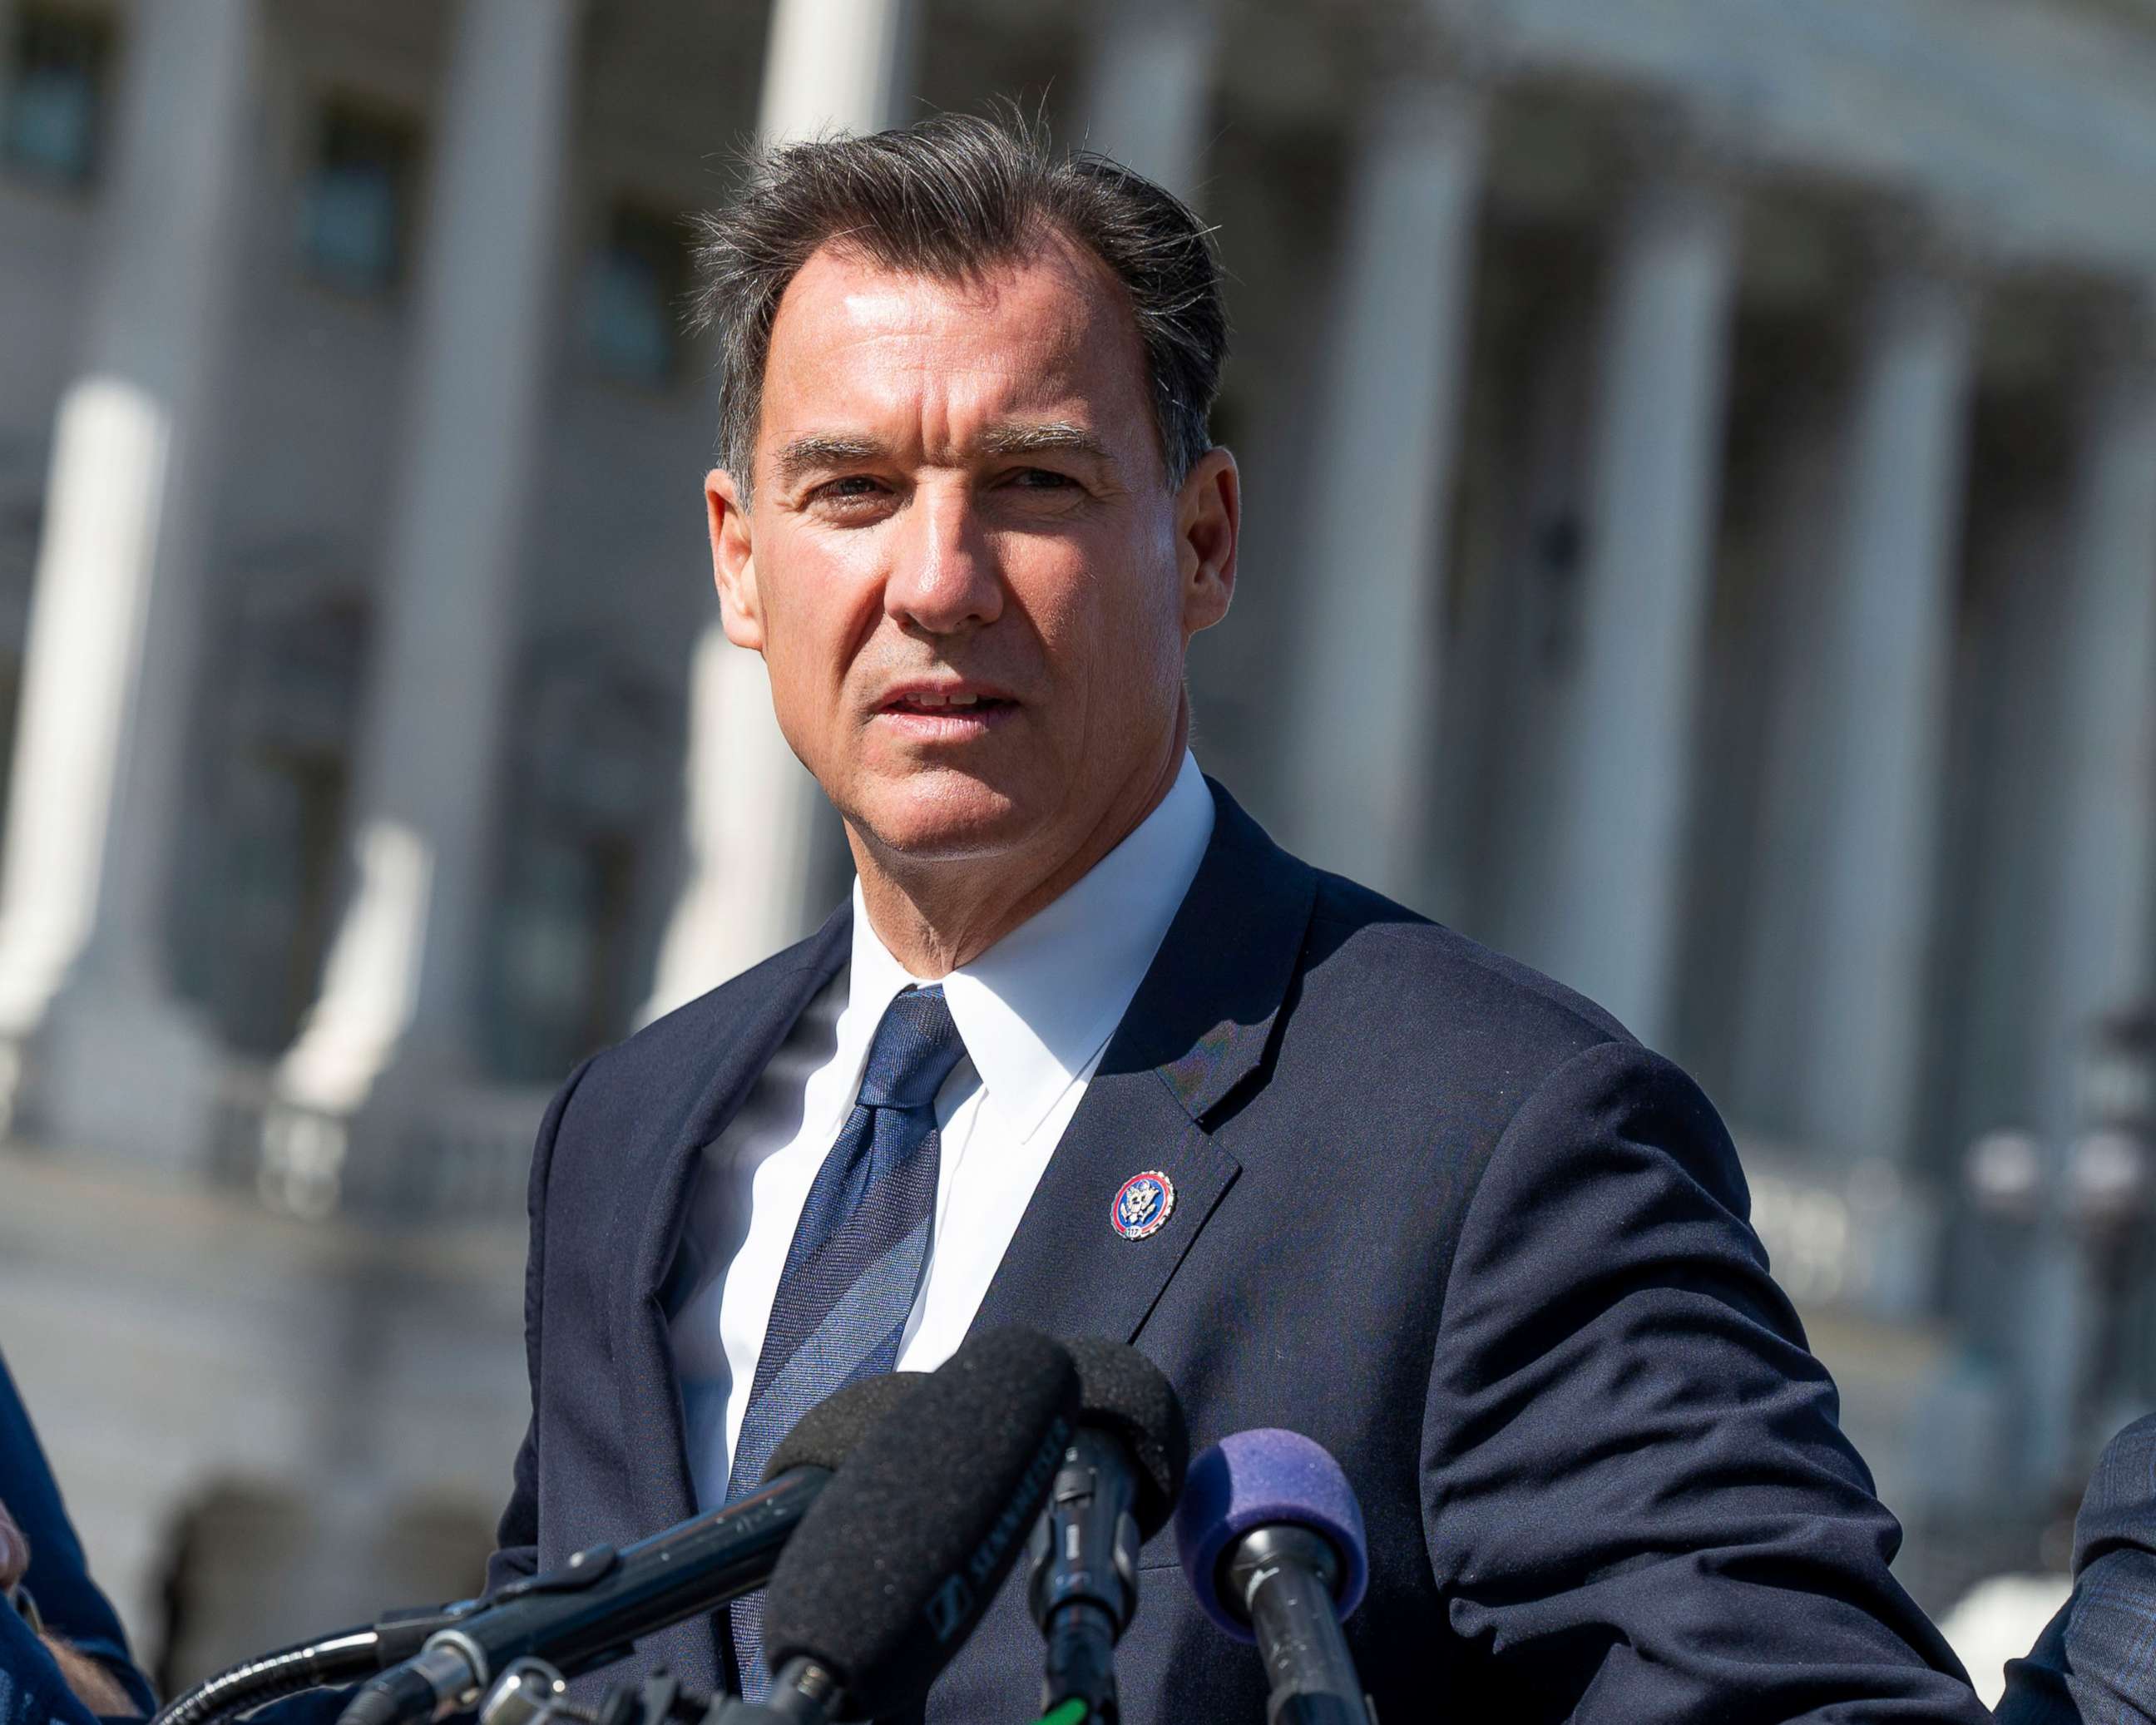 PHOTO: In this Oct. 26, 2021, file photo, Rep. Tom Suozzi speaks at a press conference in Washington, D.C.